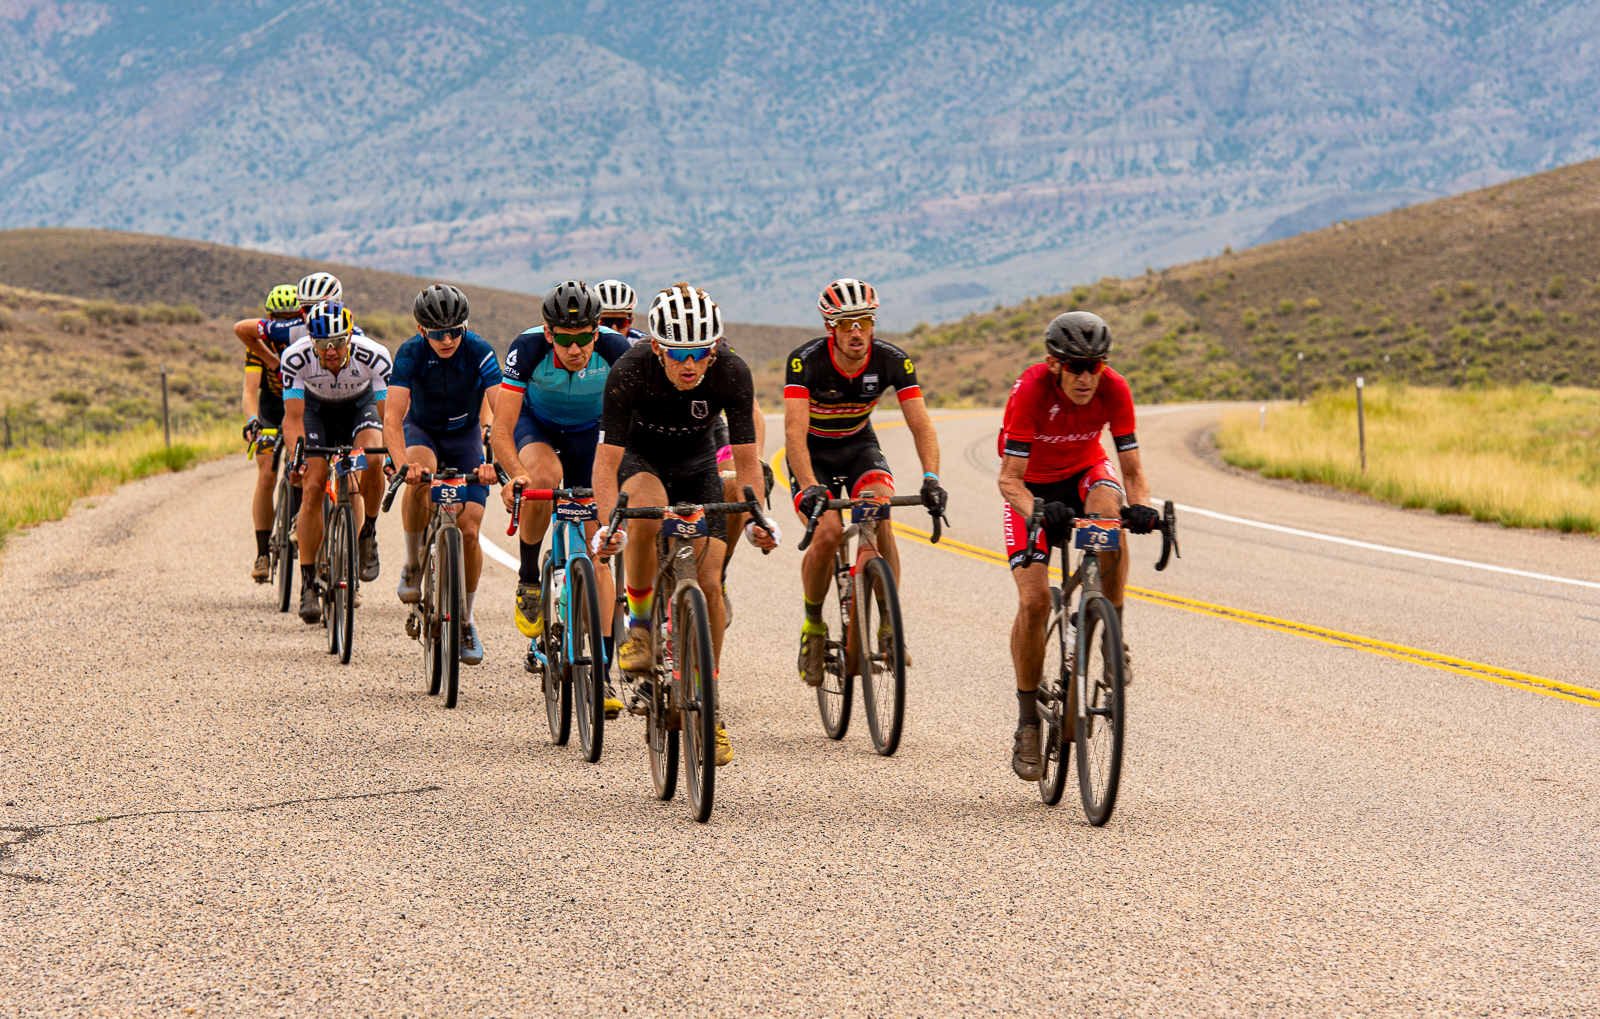 Ned Overend leading the chase group at the 2018 Crusher in the Tushar.